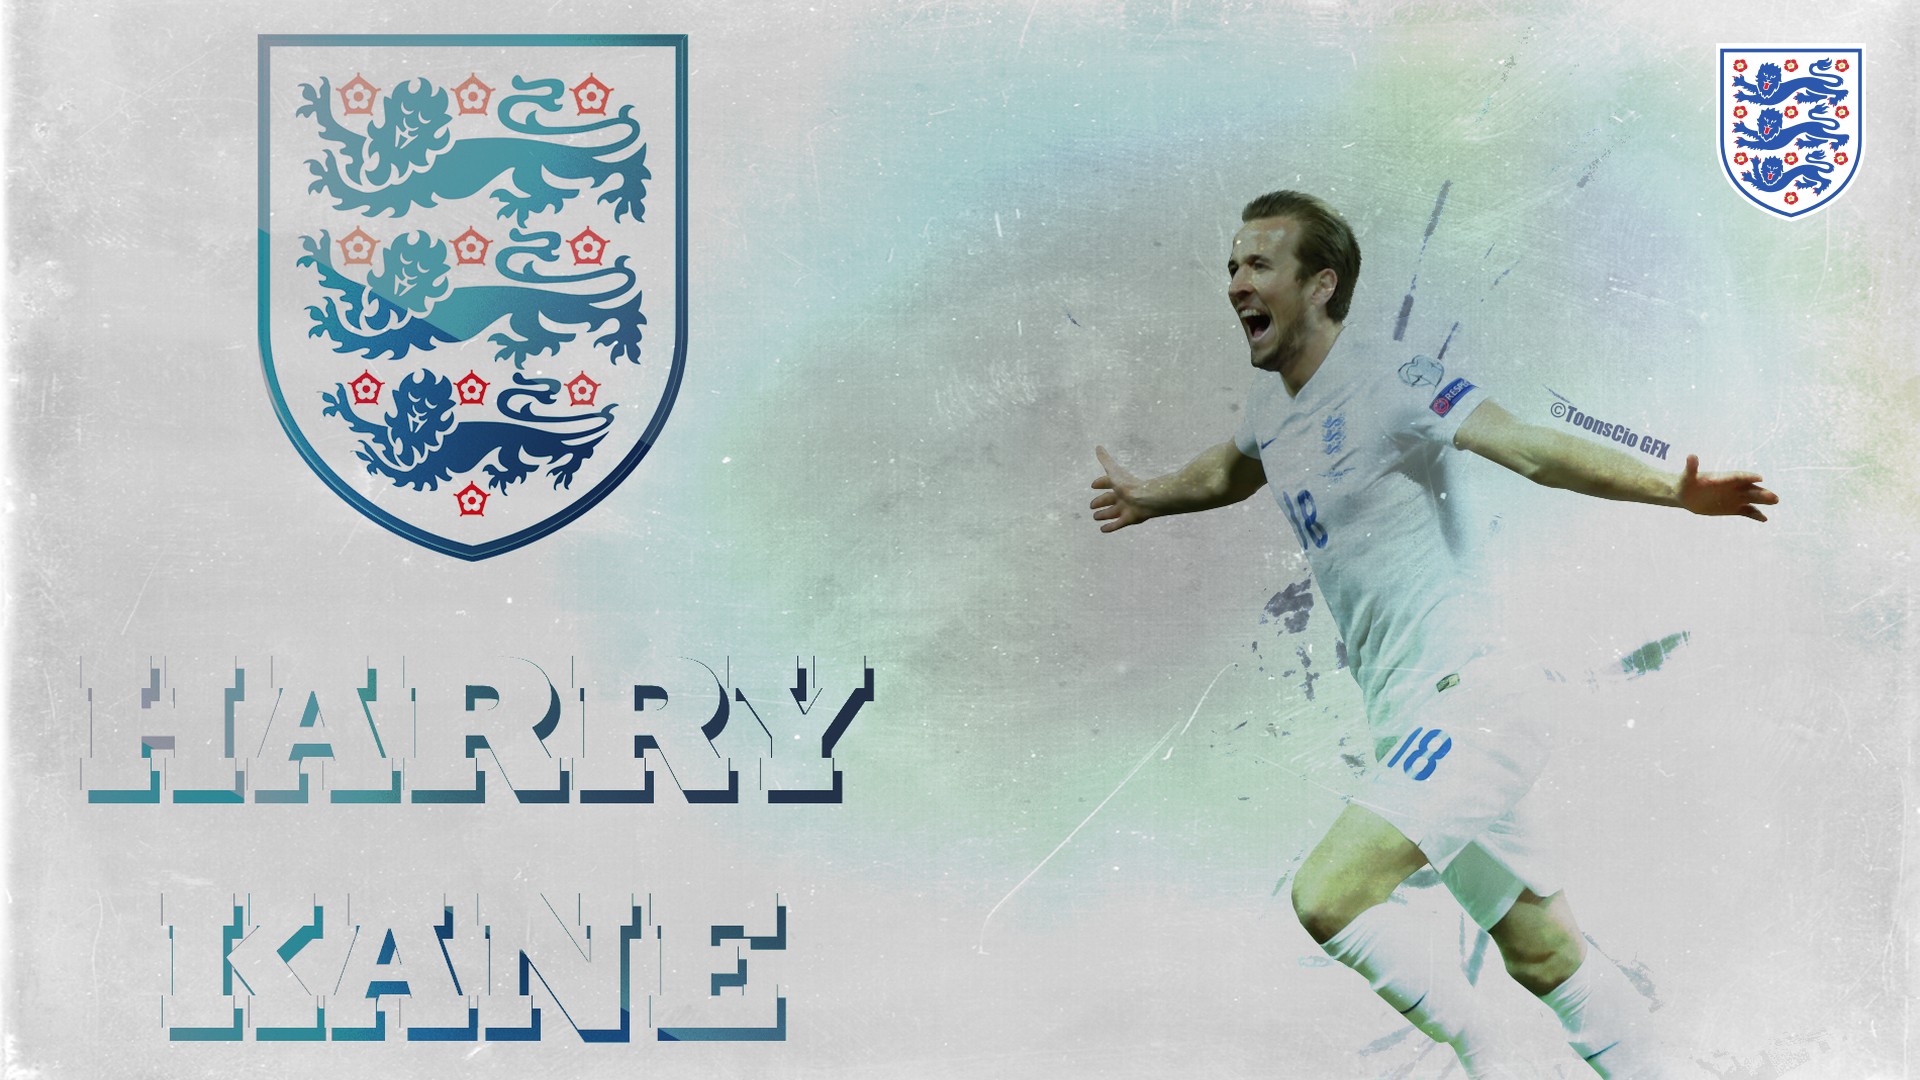 England Soccer Team Wallpaper With Resolution 1920X1080 pixel. You can make this wallpaper for your Mac or Windows Desktop Background, iPhone, Android or Tablet and another Smartphone device for free